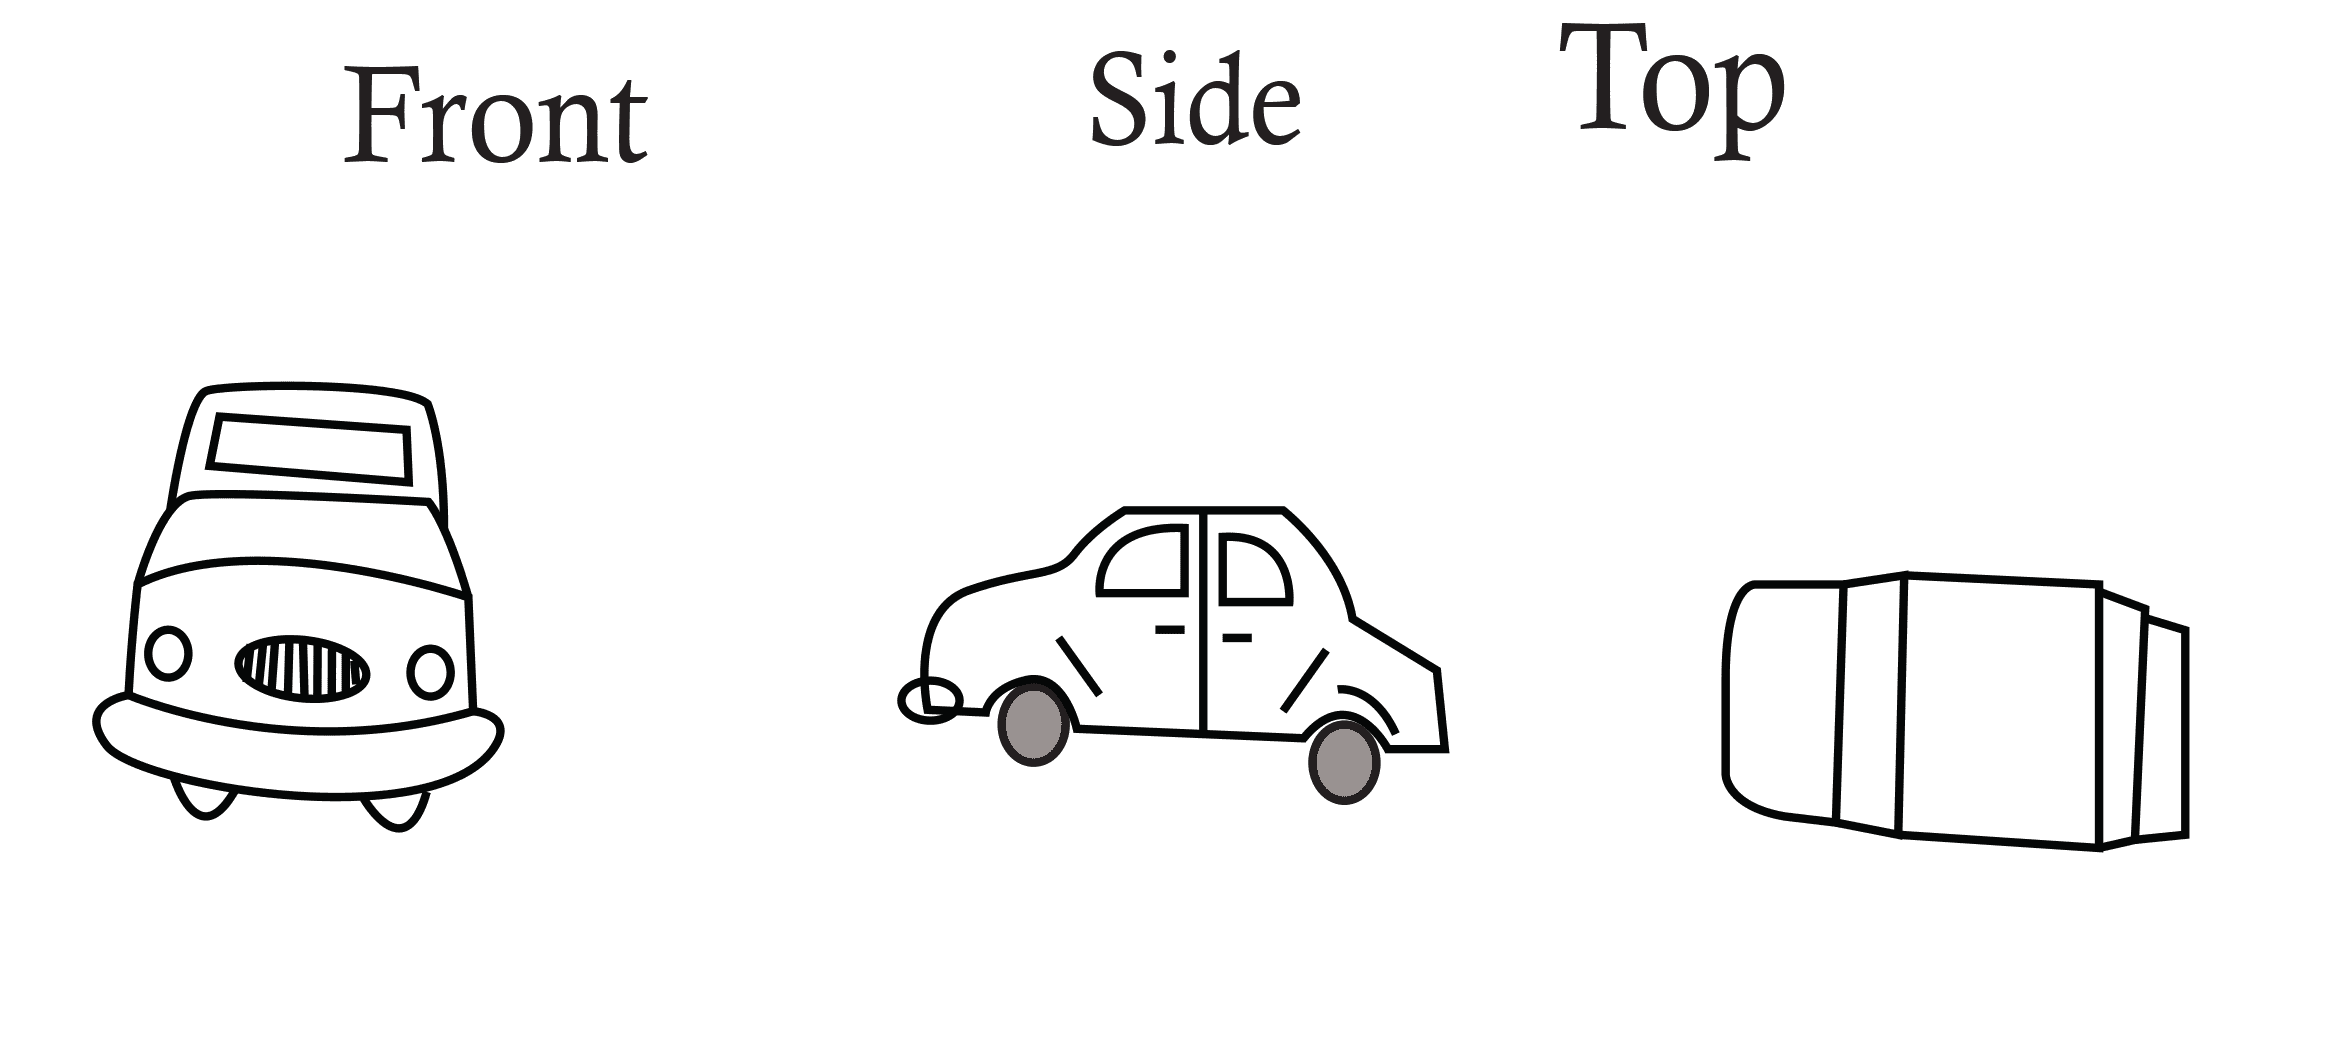 Front, Side, and Top view of a car